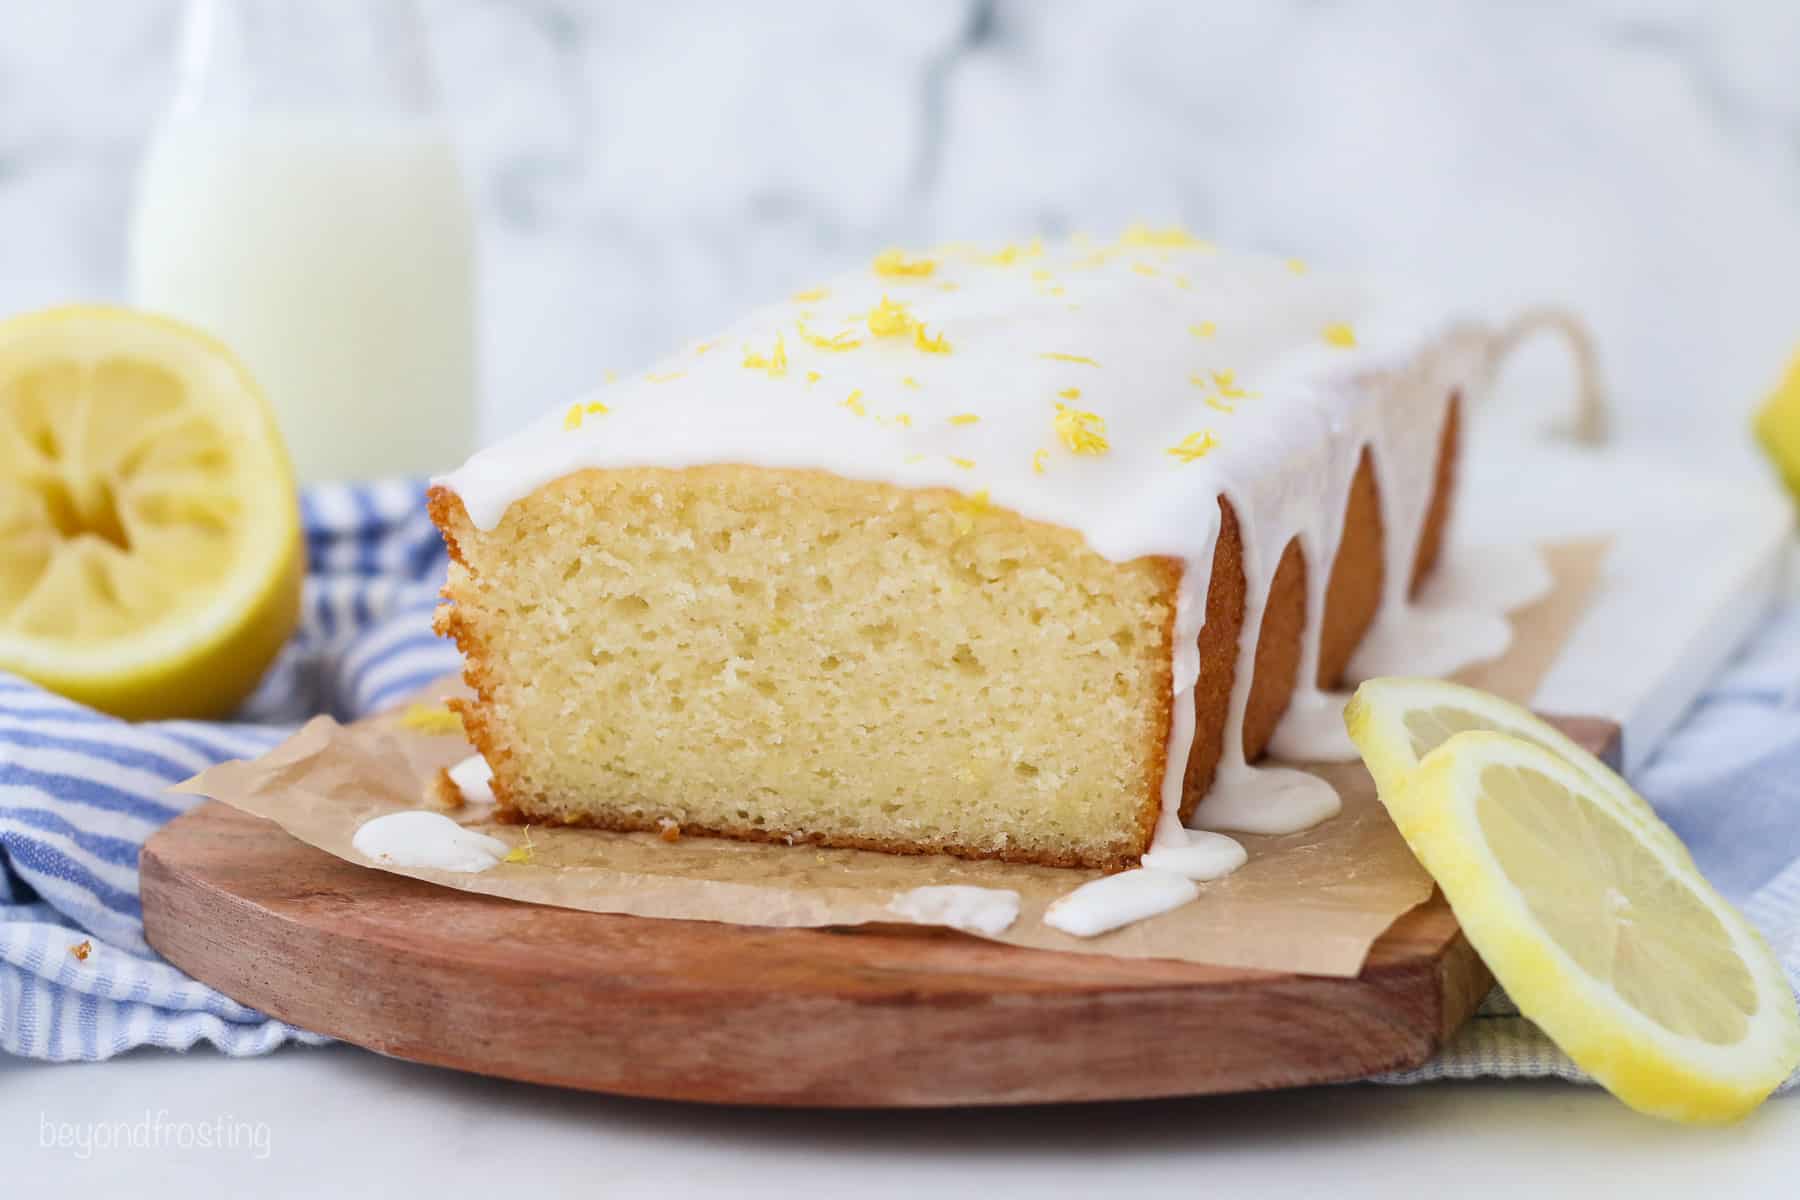 Glazed lemon bread on a wooden cutting board lined with parchment paper, next to a lemon slice.